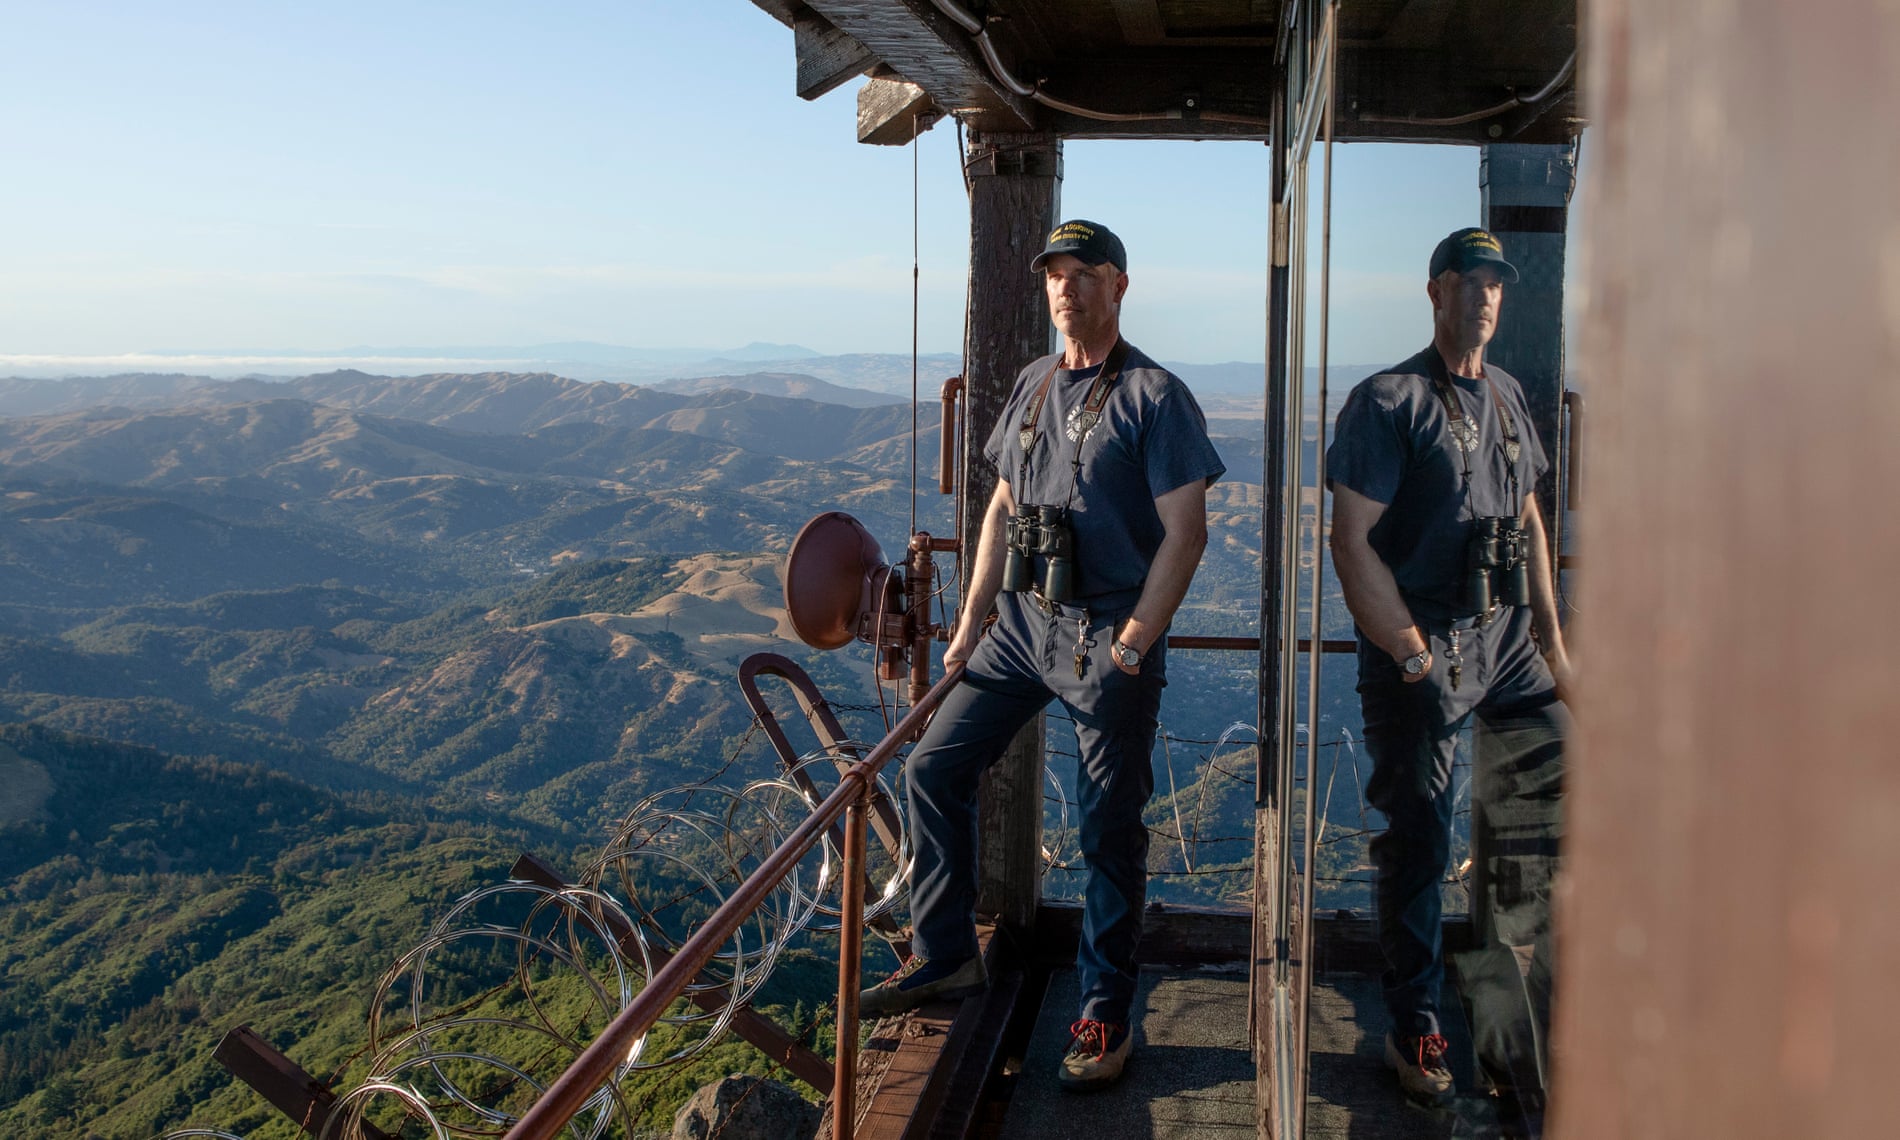 Rory Hewitt stands on the edge of a tower on Mt Tamalpais, California, where he is a volunteer lookout for wildfire ignitions. 